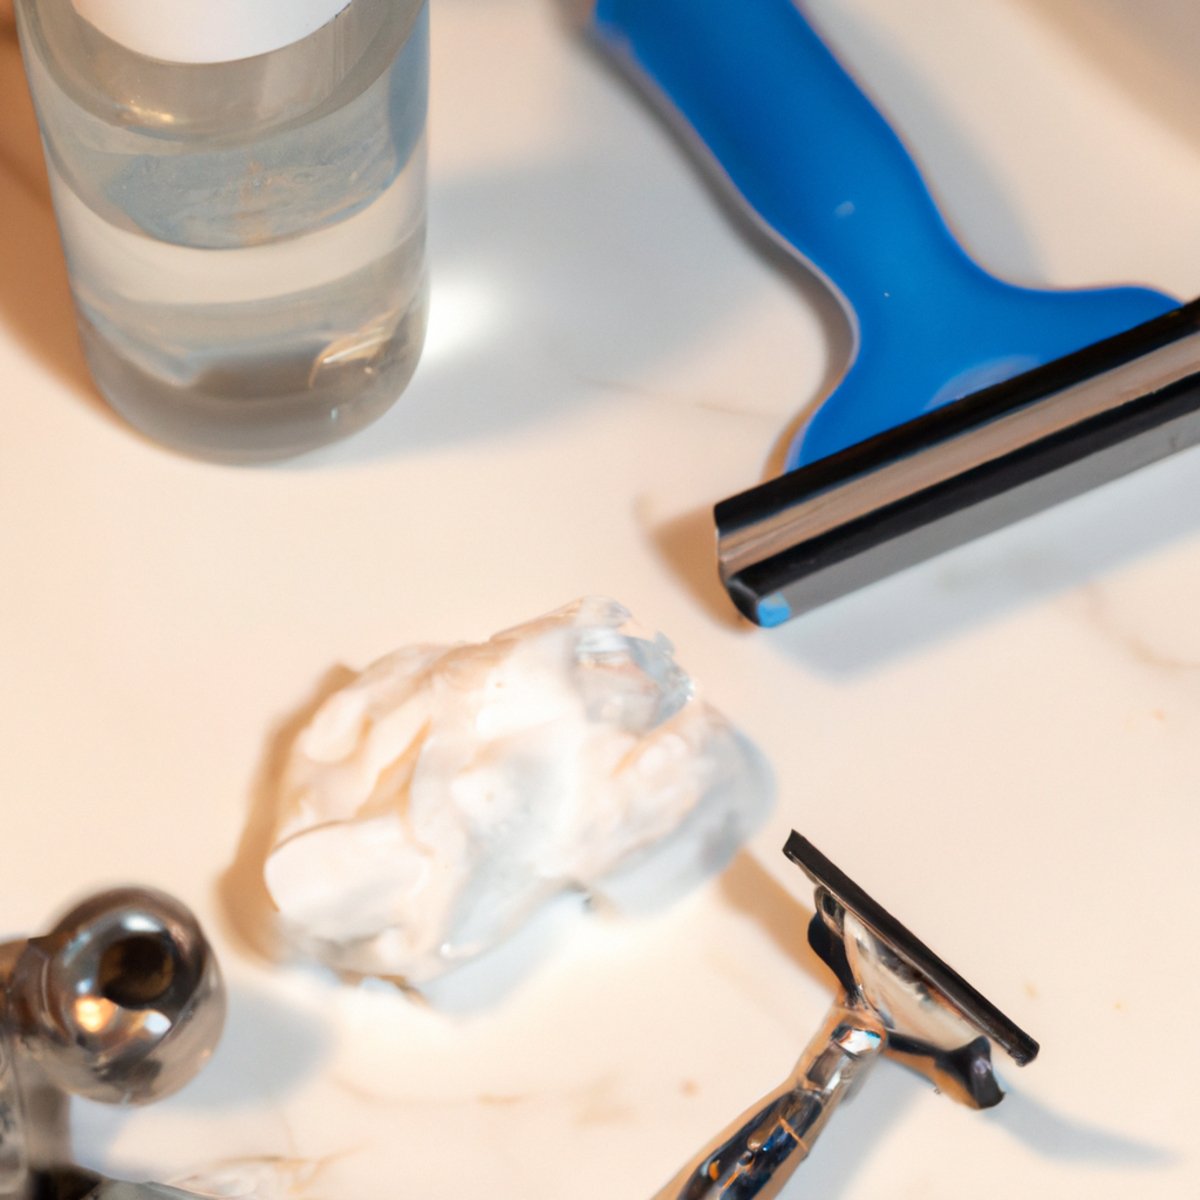 Who says natural skin care routines can't be manly? This countertop may be cluttered, but with an alcohol-free aftershave and a clean razor, you'll be looking and feeling your best in no time.